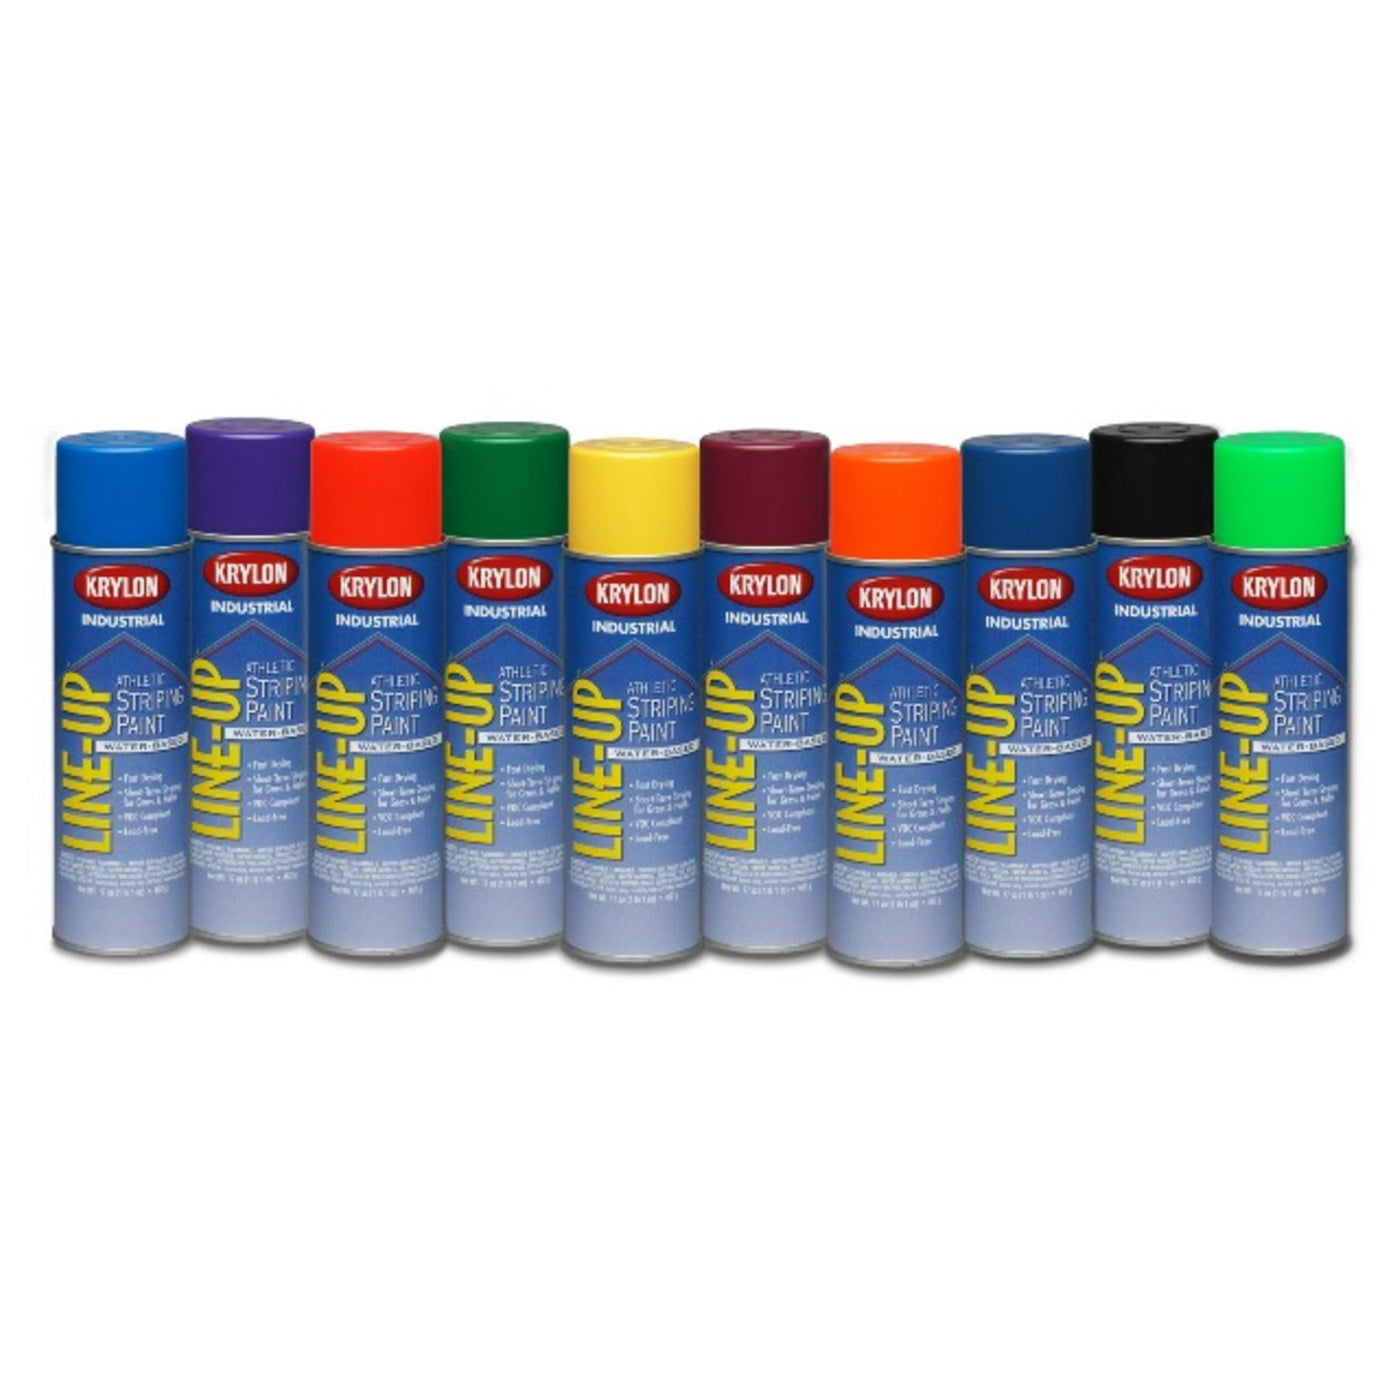 trigon sports athletic field marking paint all other colors